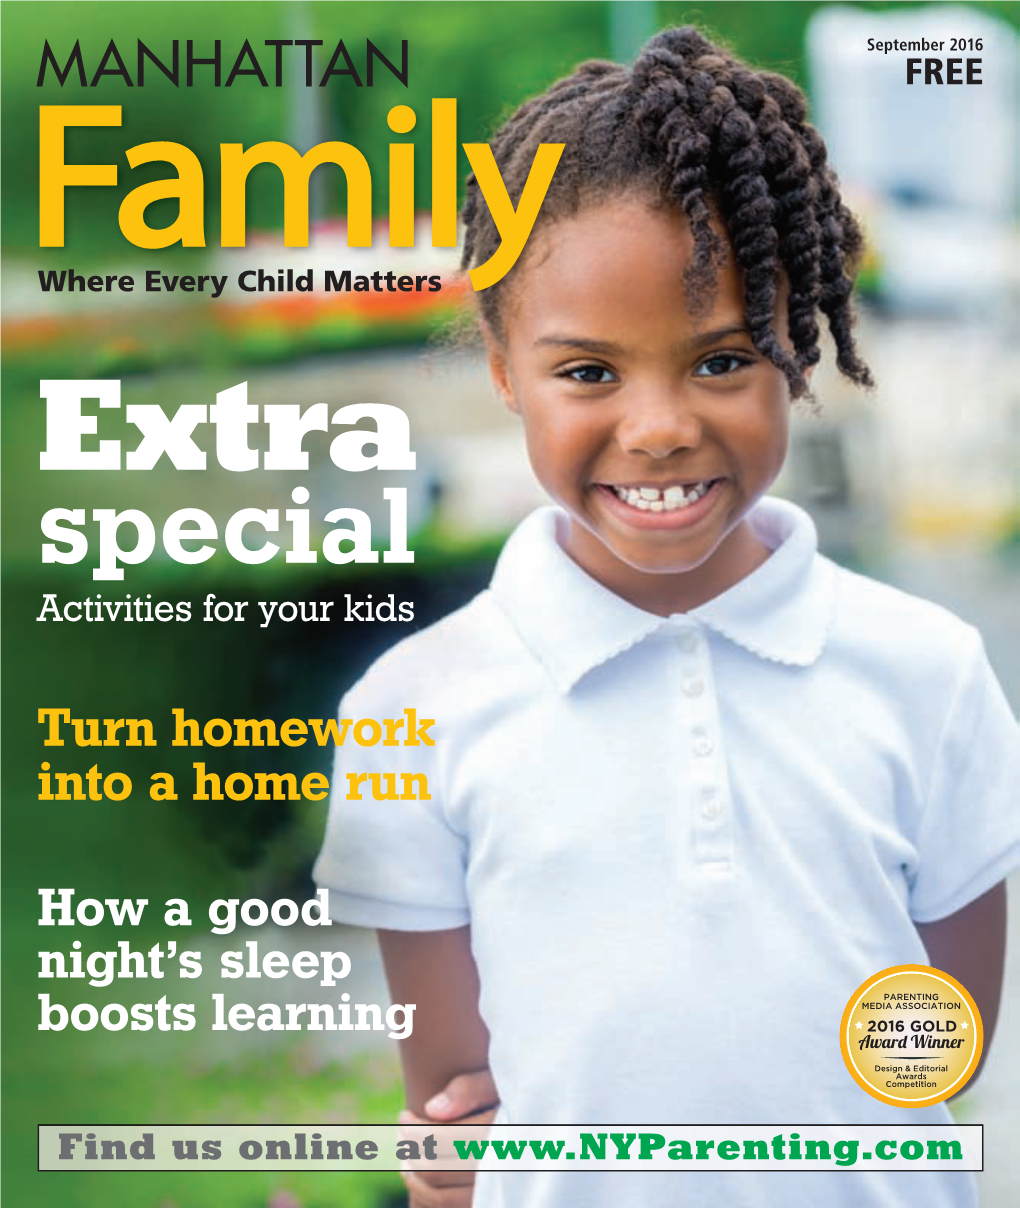 Manhattan FREE Family Where Every Child Matters Extra Special Activities for Your Kids